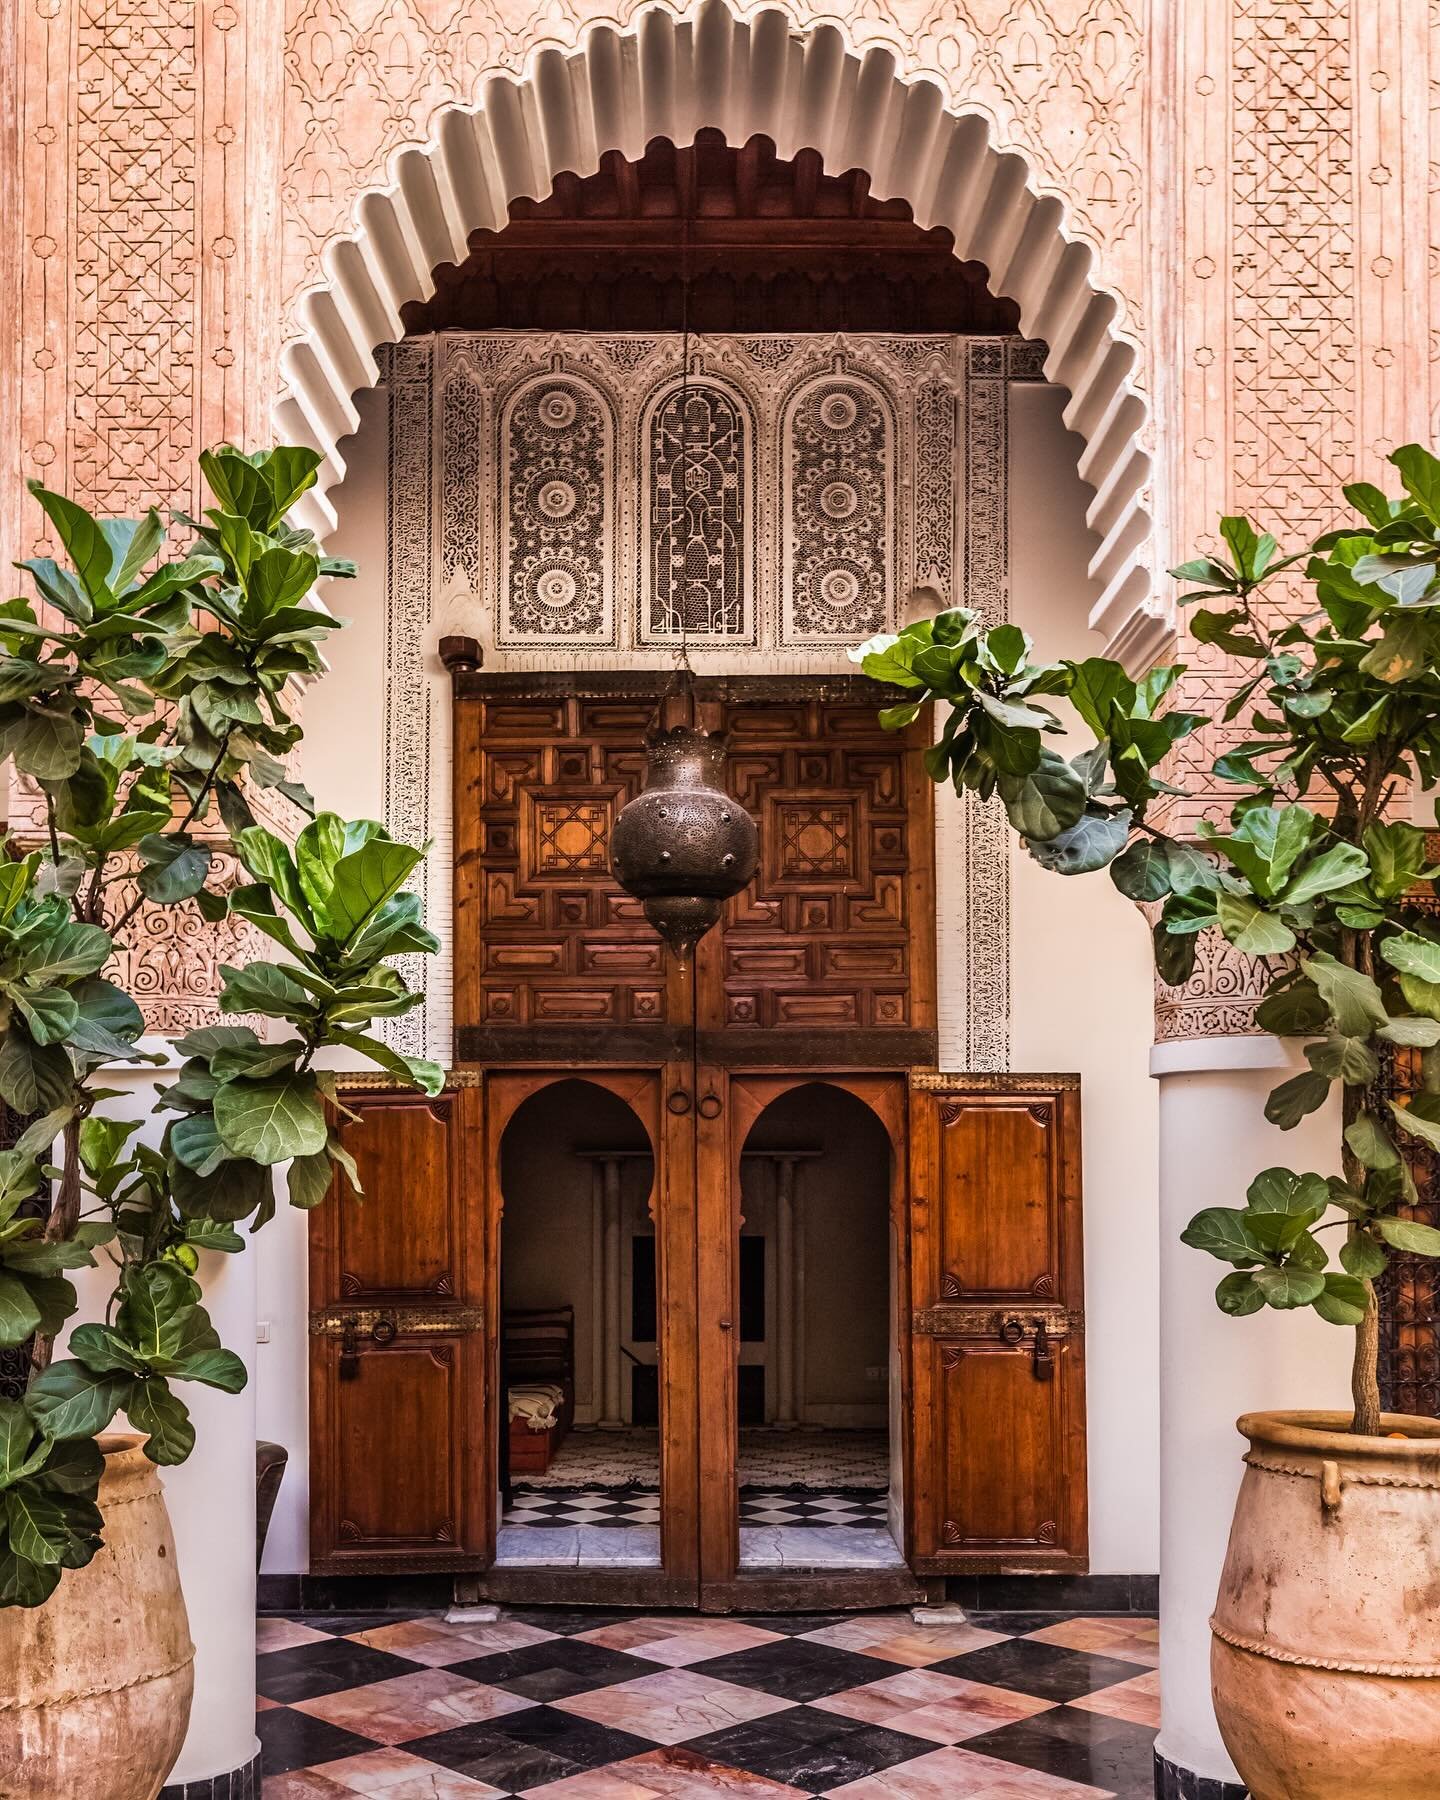 El Fenn is one of the first restored Marrakesh homes that was converted into a riad. Located on the edge of the Medina, a short walk away from the Djemaa El Fna square, the hotel beautifully combines Moroccan heritage design with contemporary accents